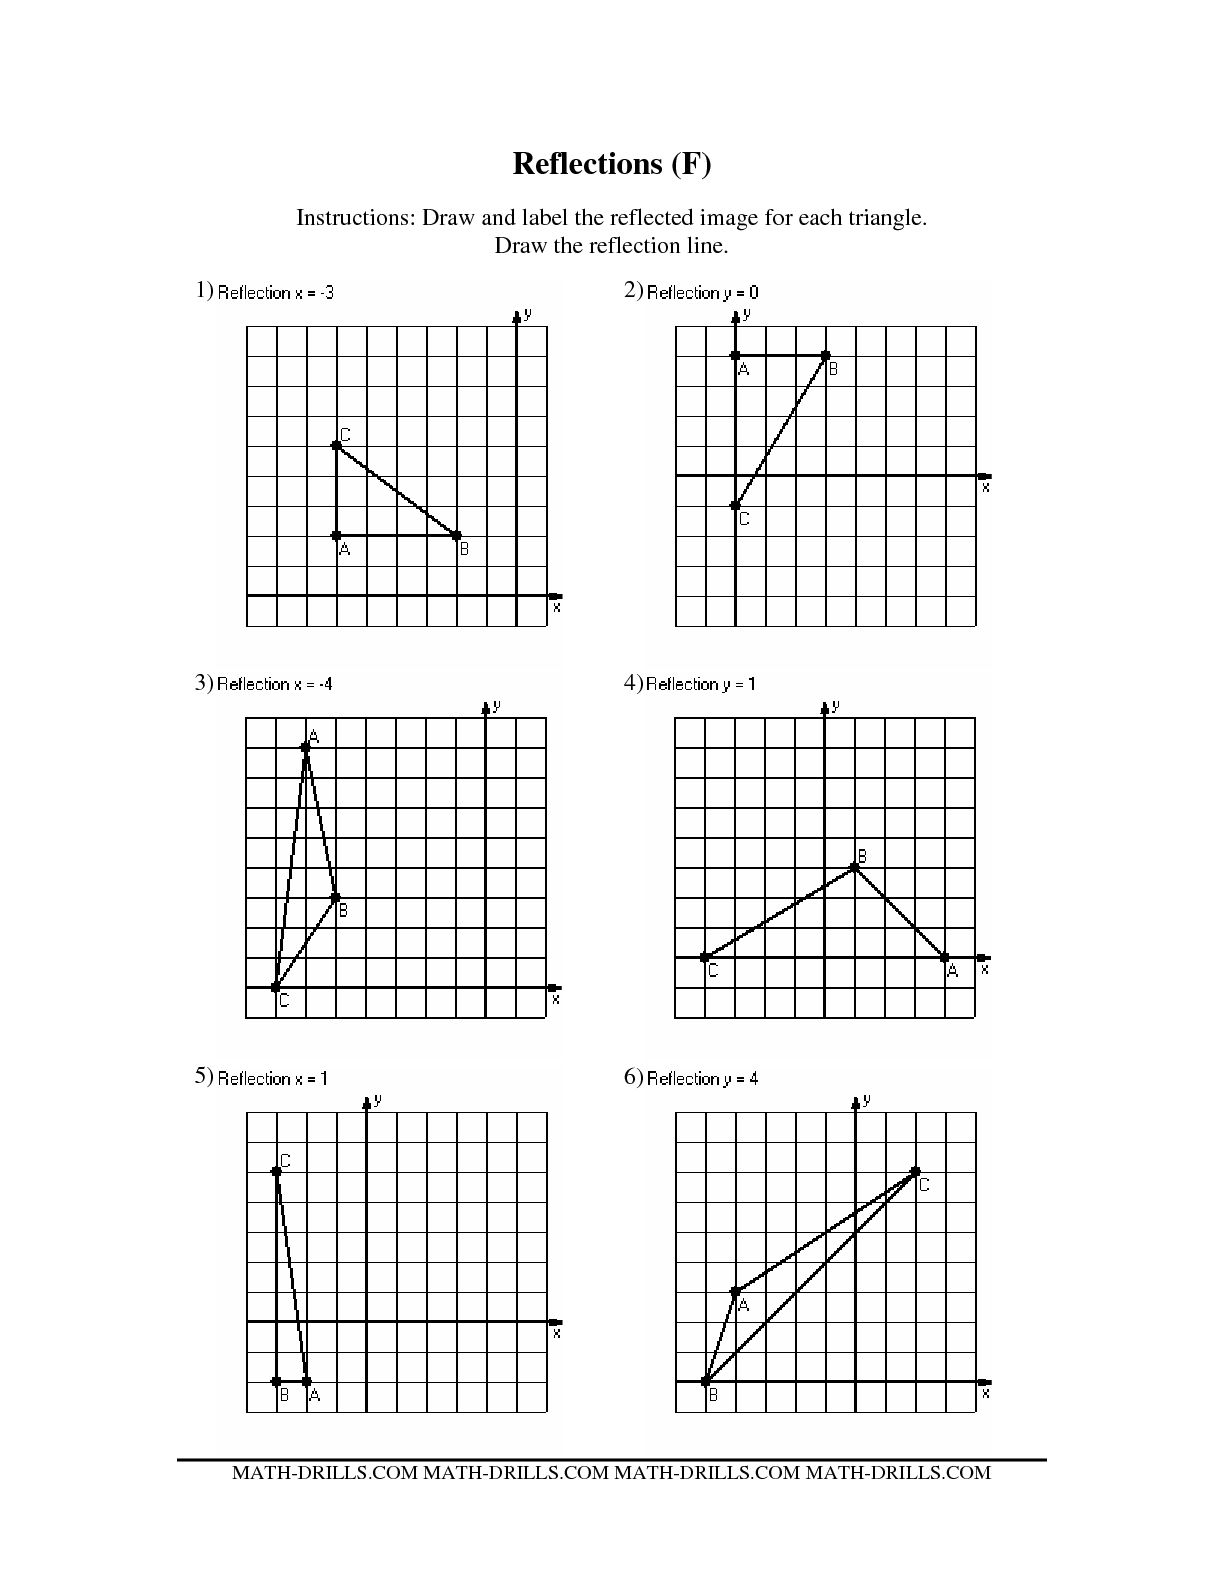 18-best-images-of-dilations-geometry-worksheets-answers-reflection-math-worksheets-kuta